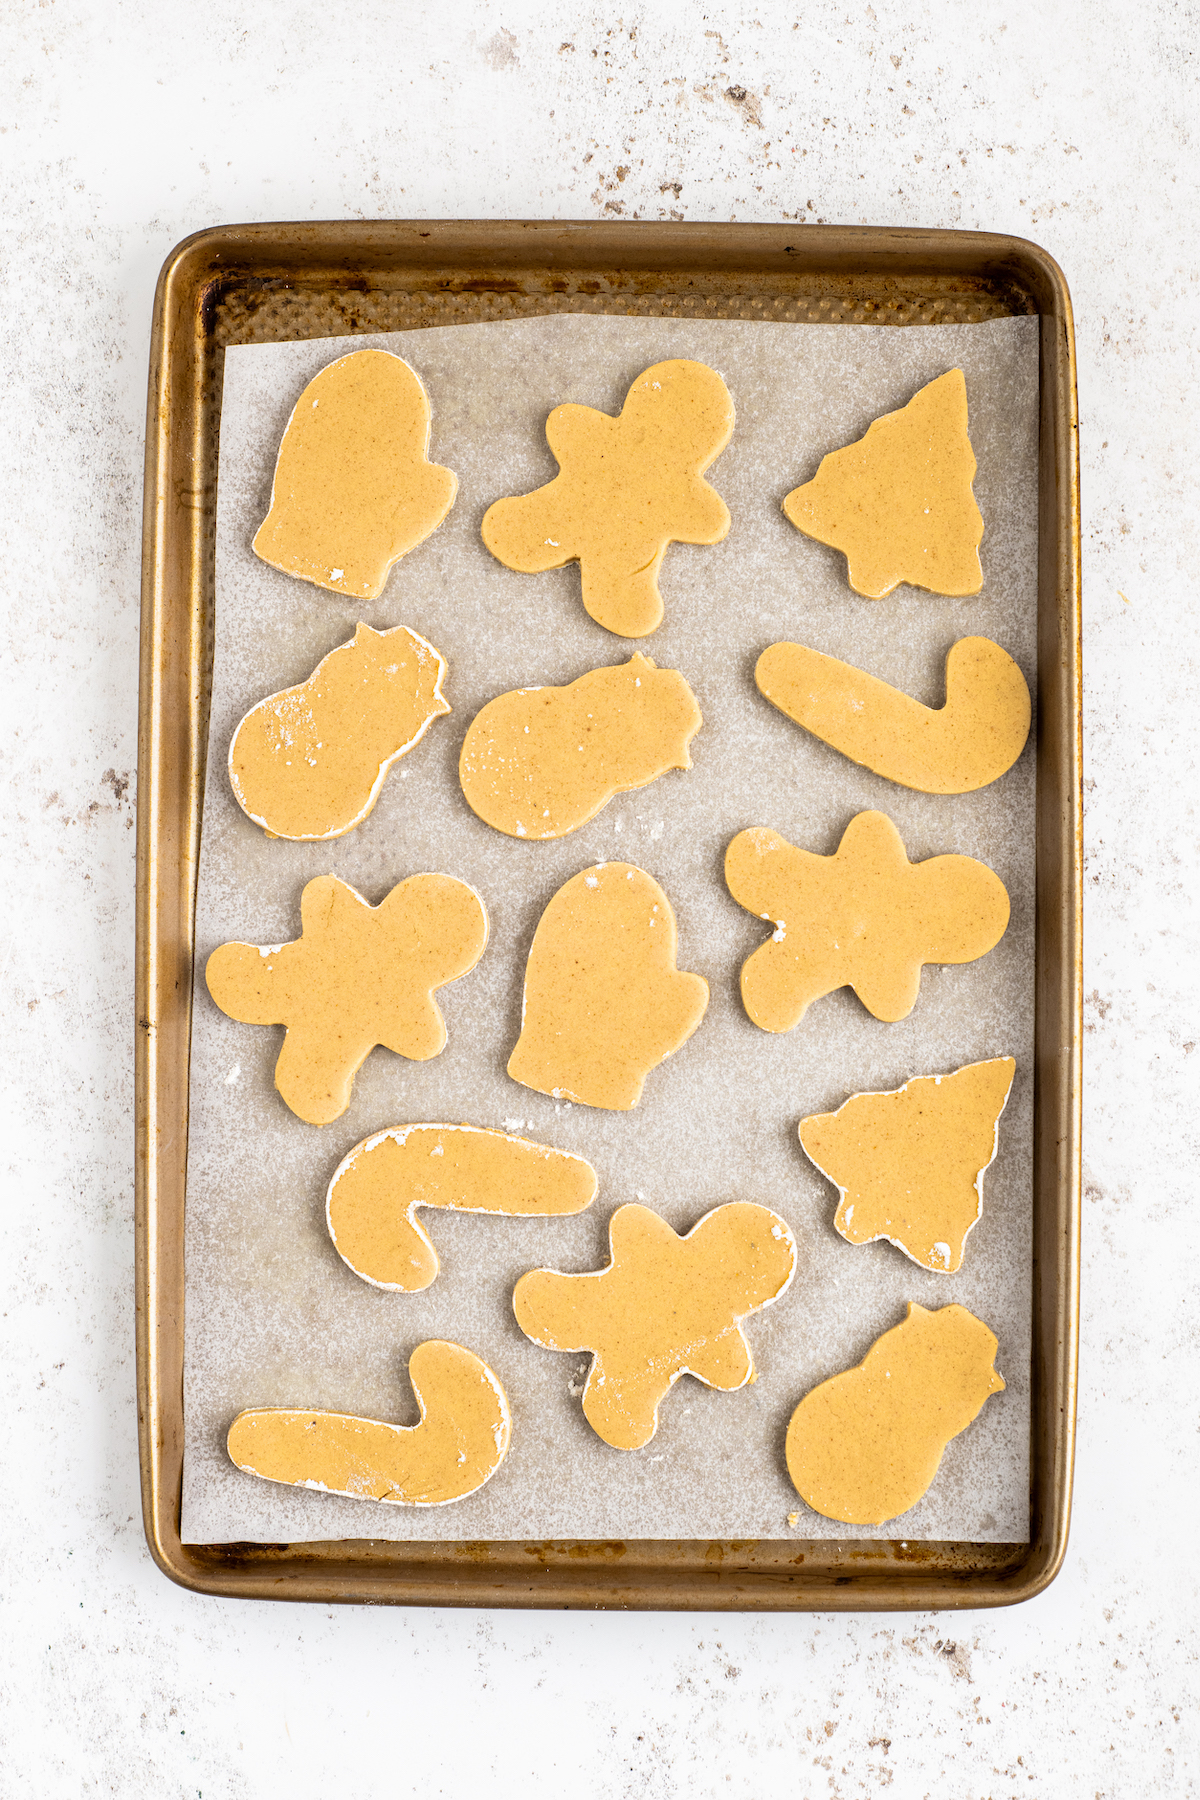 A cookie sheet lined with parchment, and cut-out unbaked cookies on it.